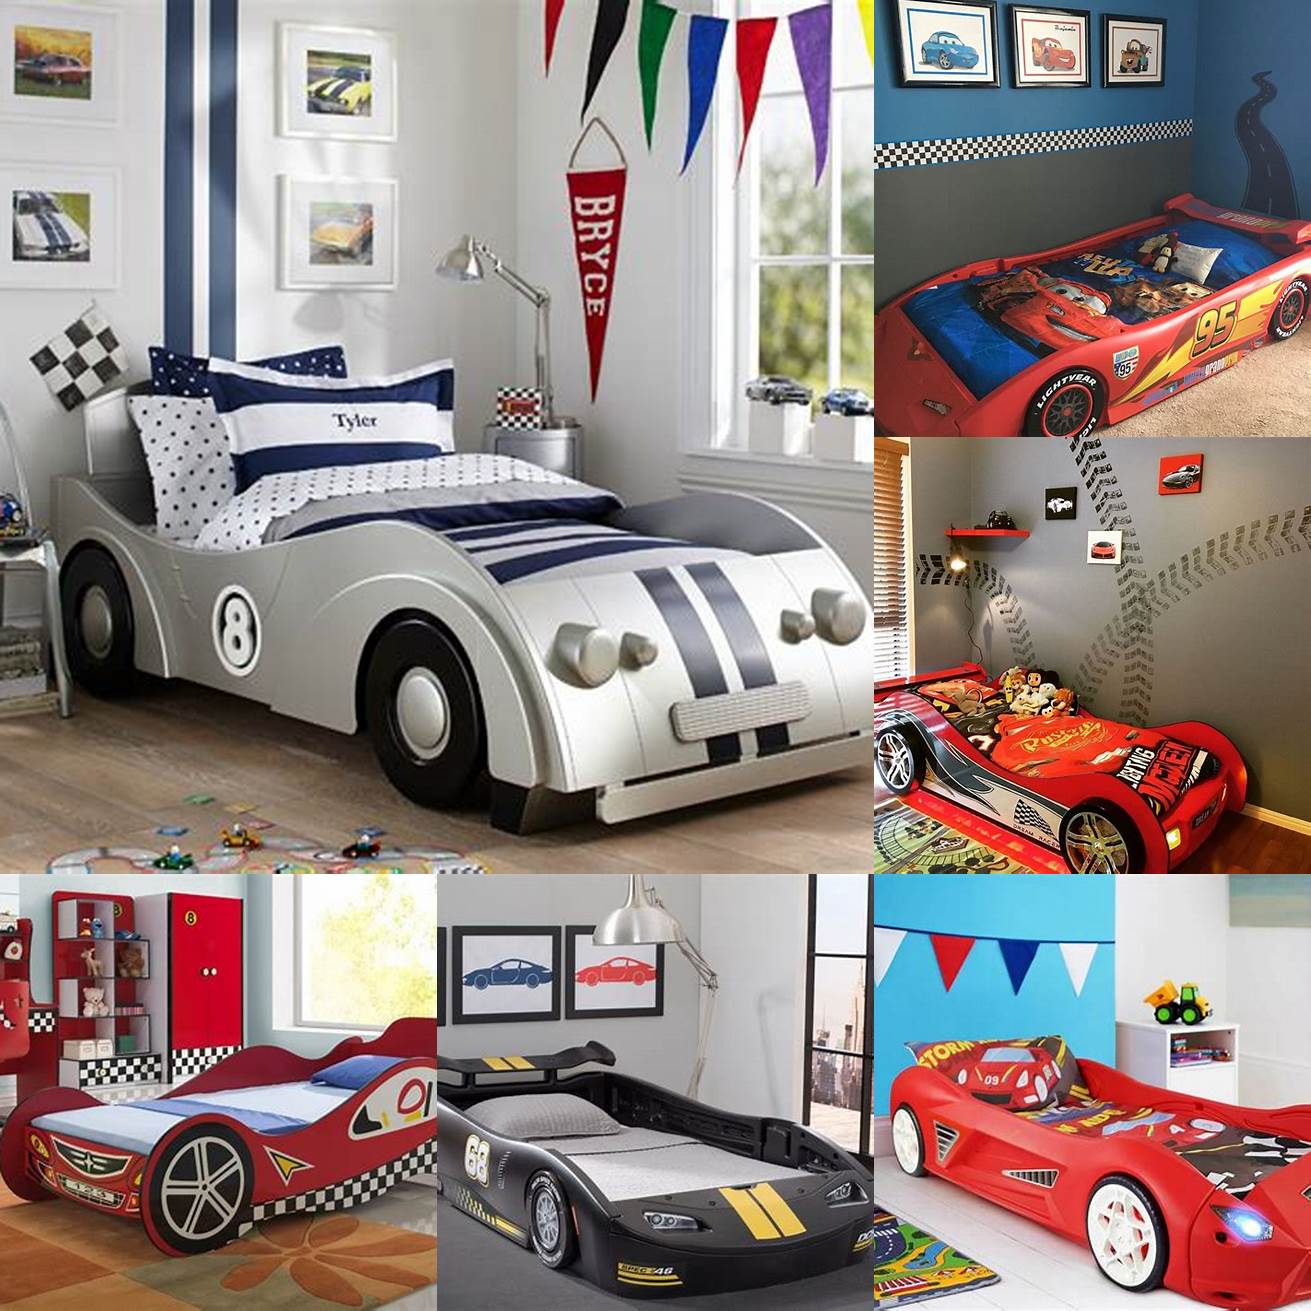 A classic sports car-inspired bed for little boys who love racing